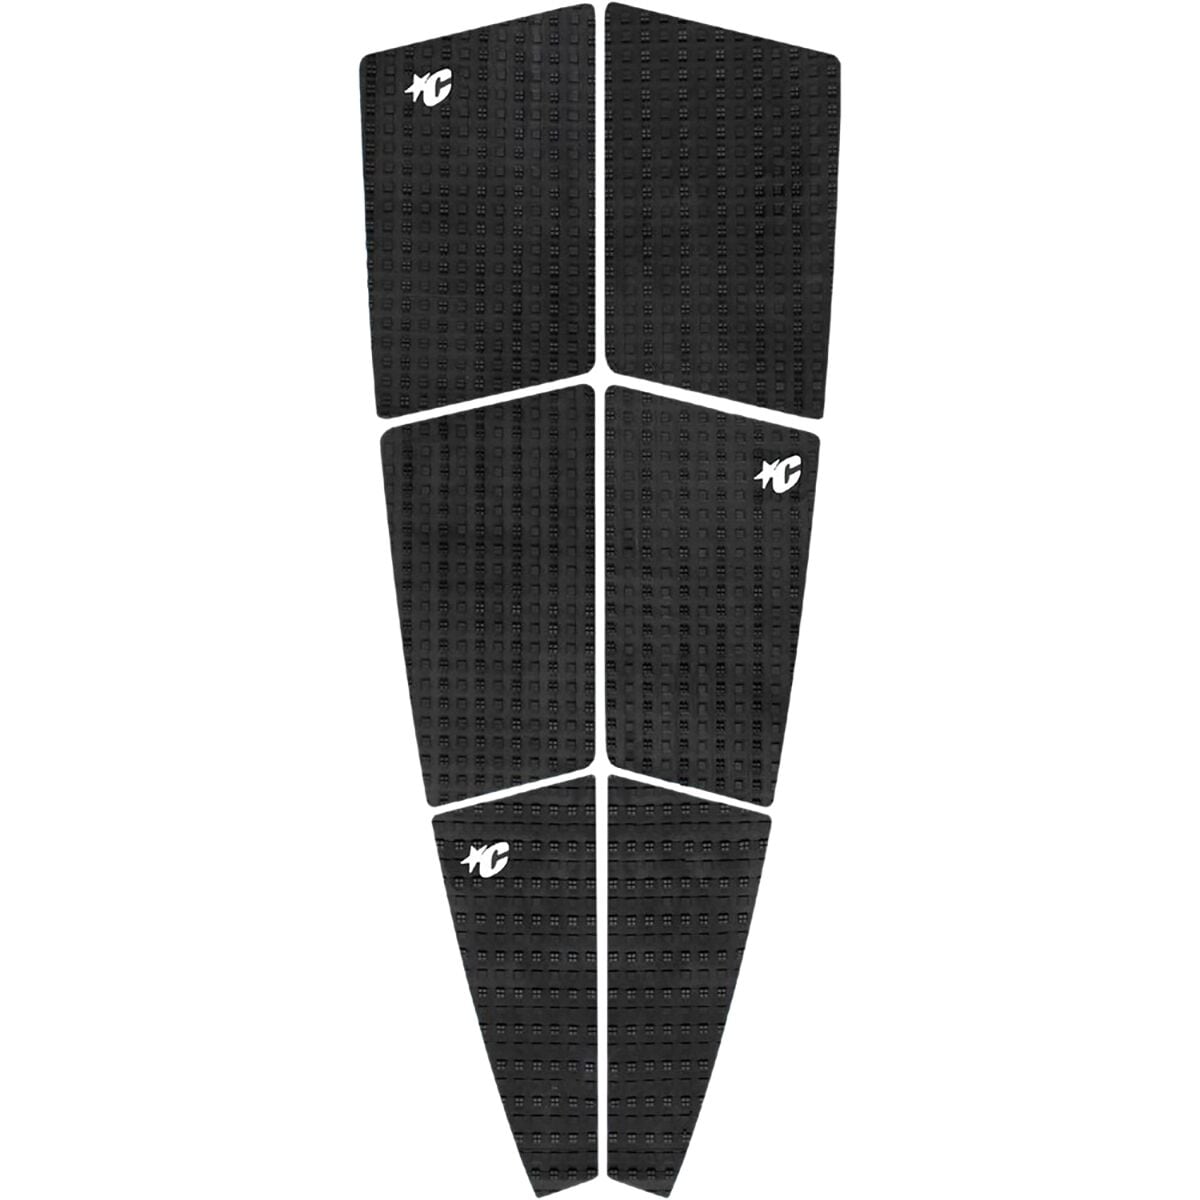 Creatures of Leisure SUP 6-Piece Traction Pad